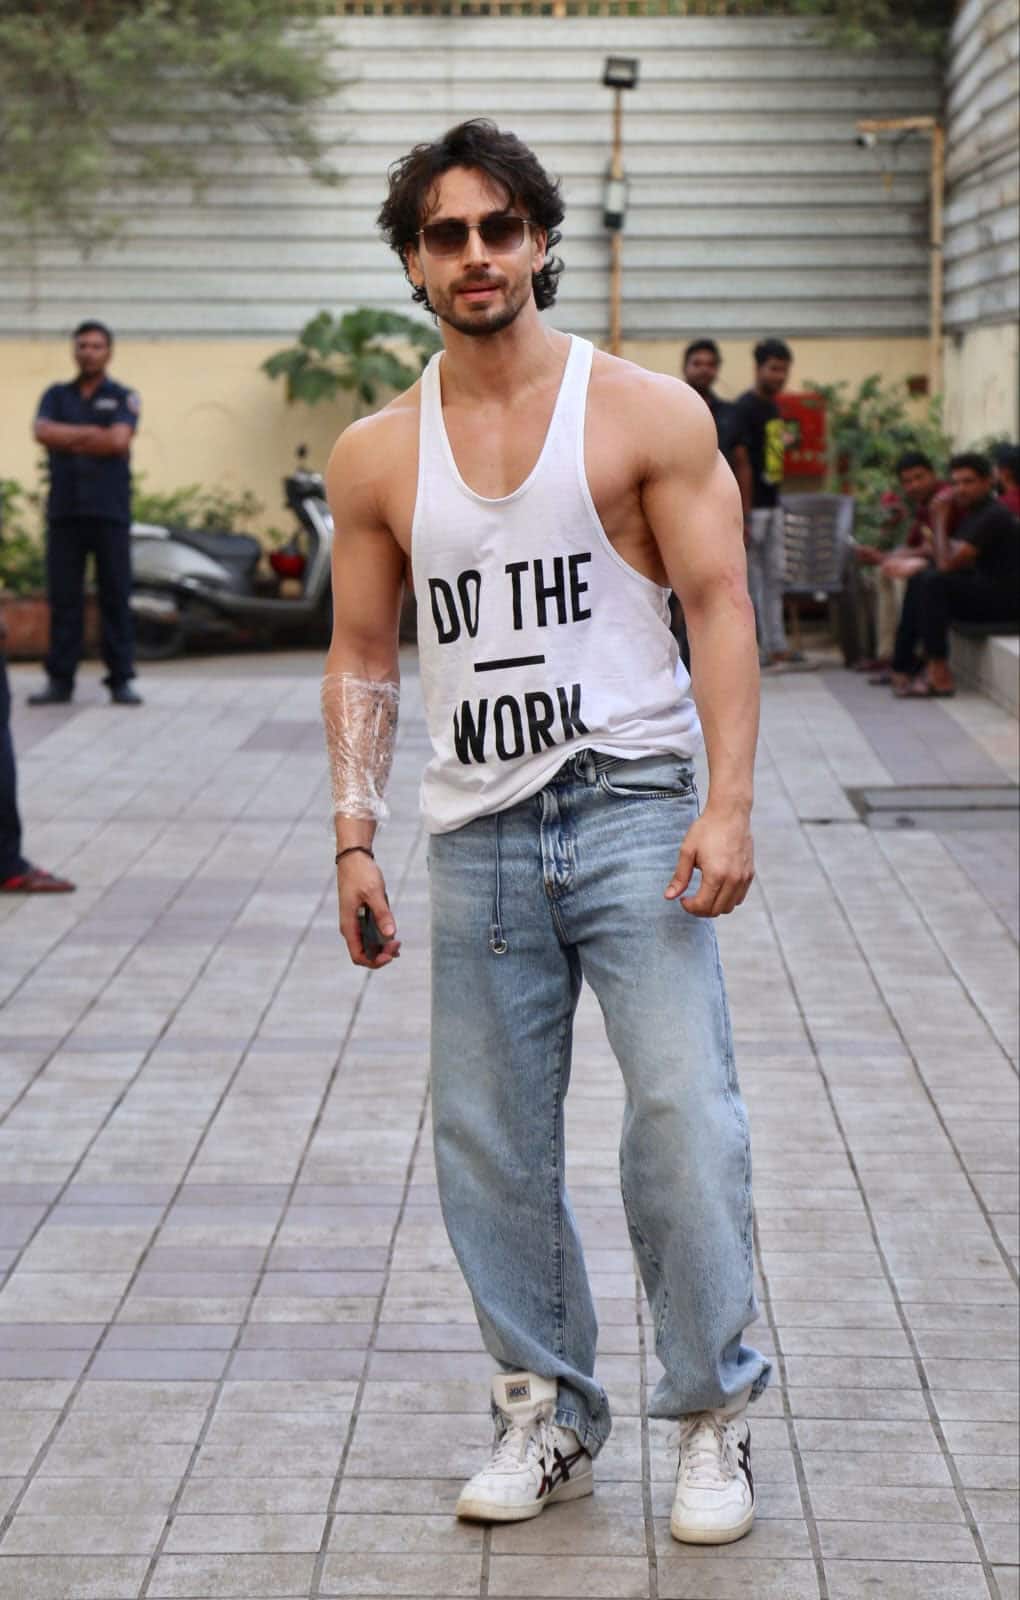 Tiger Shroff Gets Inked again, Spotted With New Tattoo on Forearm | Movies  News | Zee News